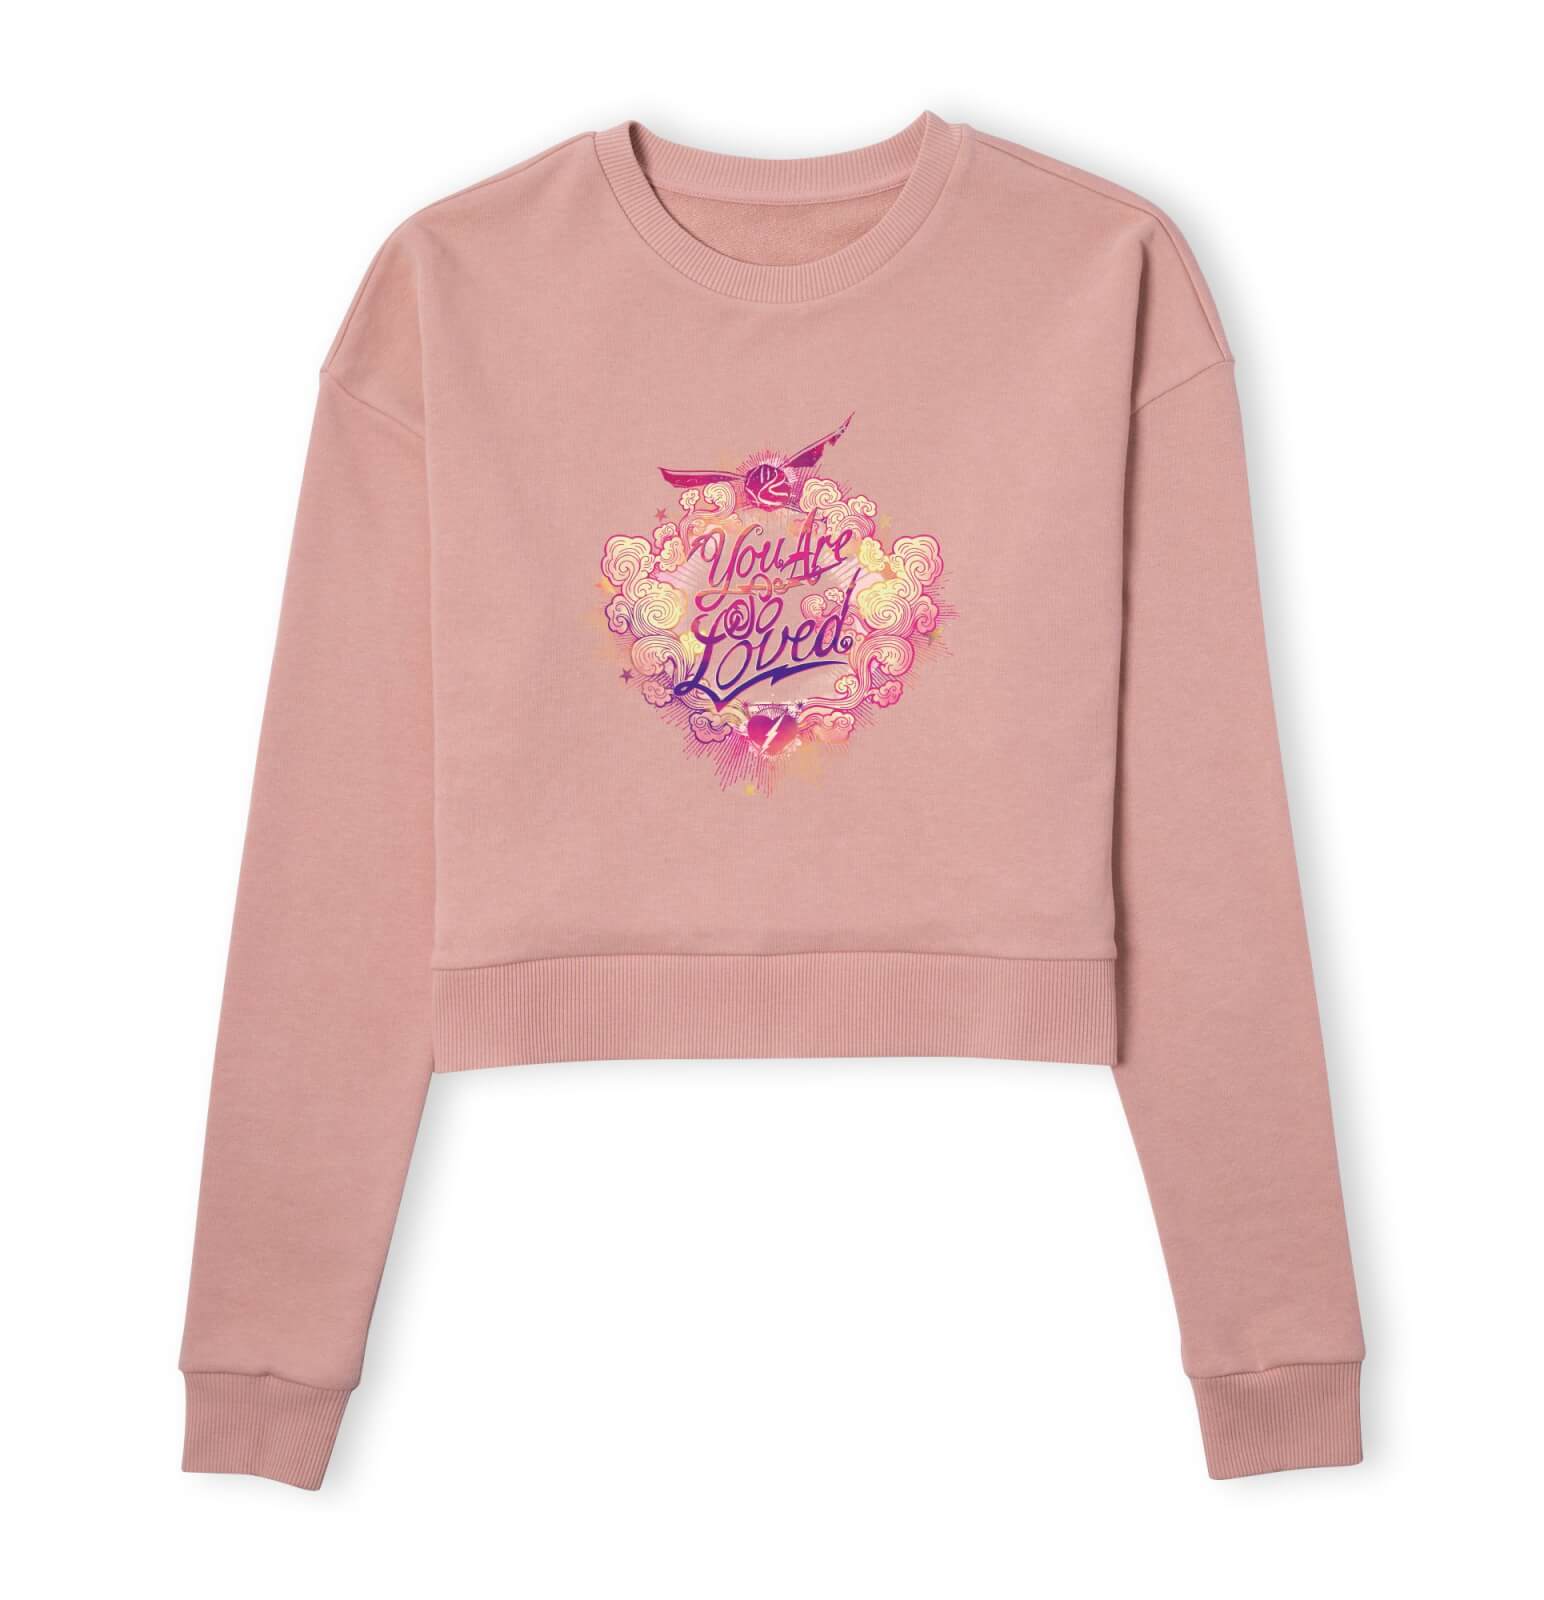 Harry Potter You Are So Loved Women's Cropped Sweatshirt - Dusty Pink - S - Dusty pink